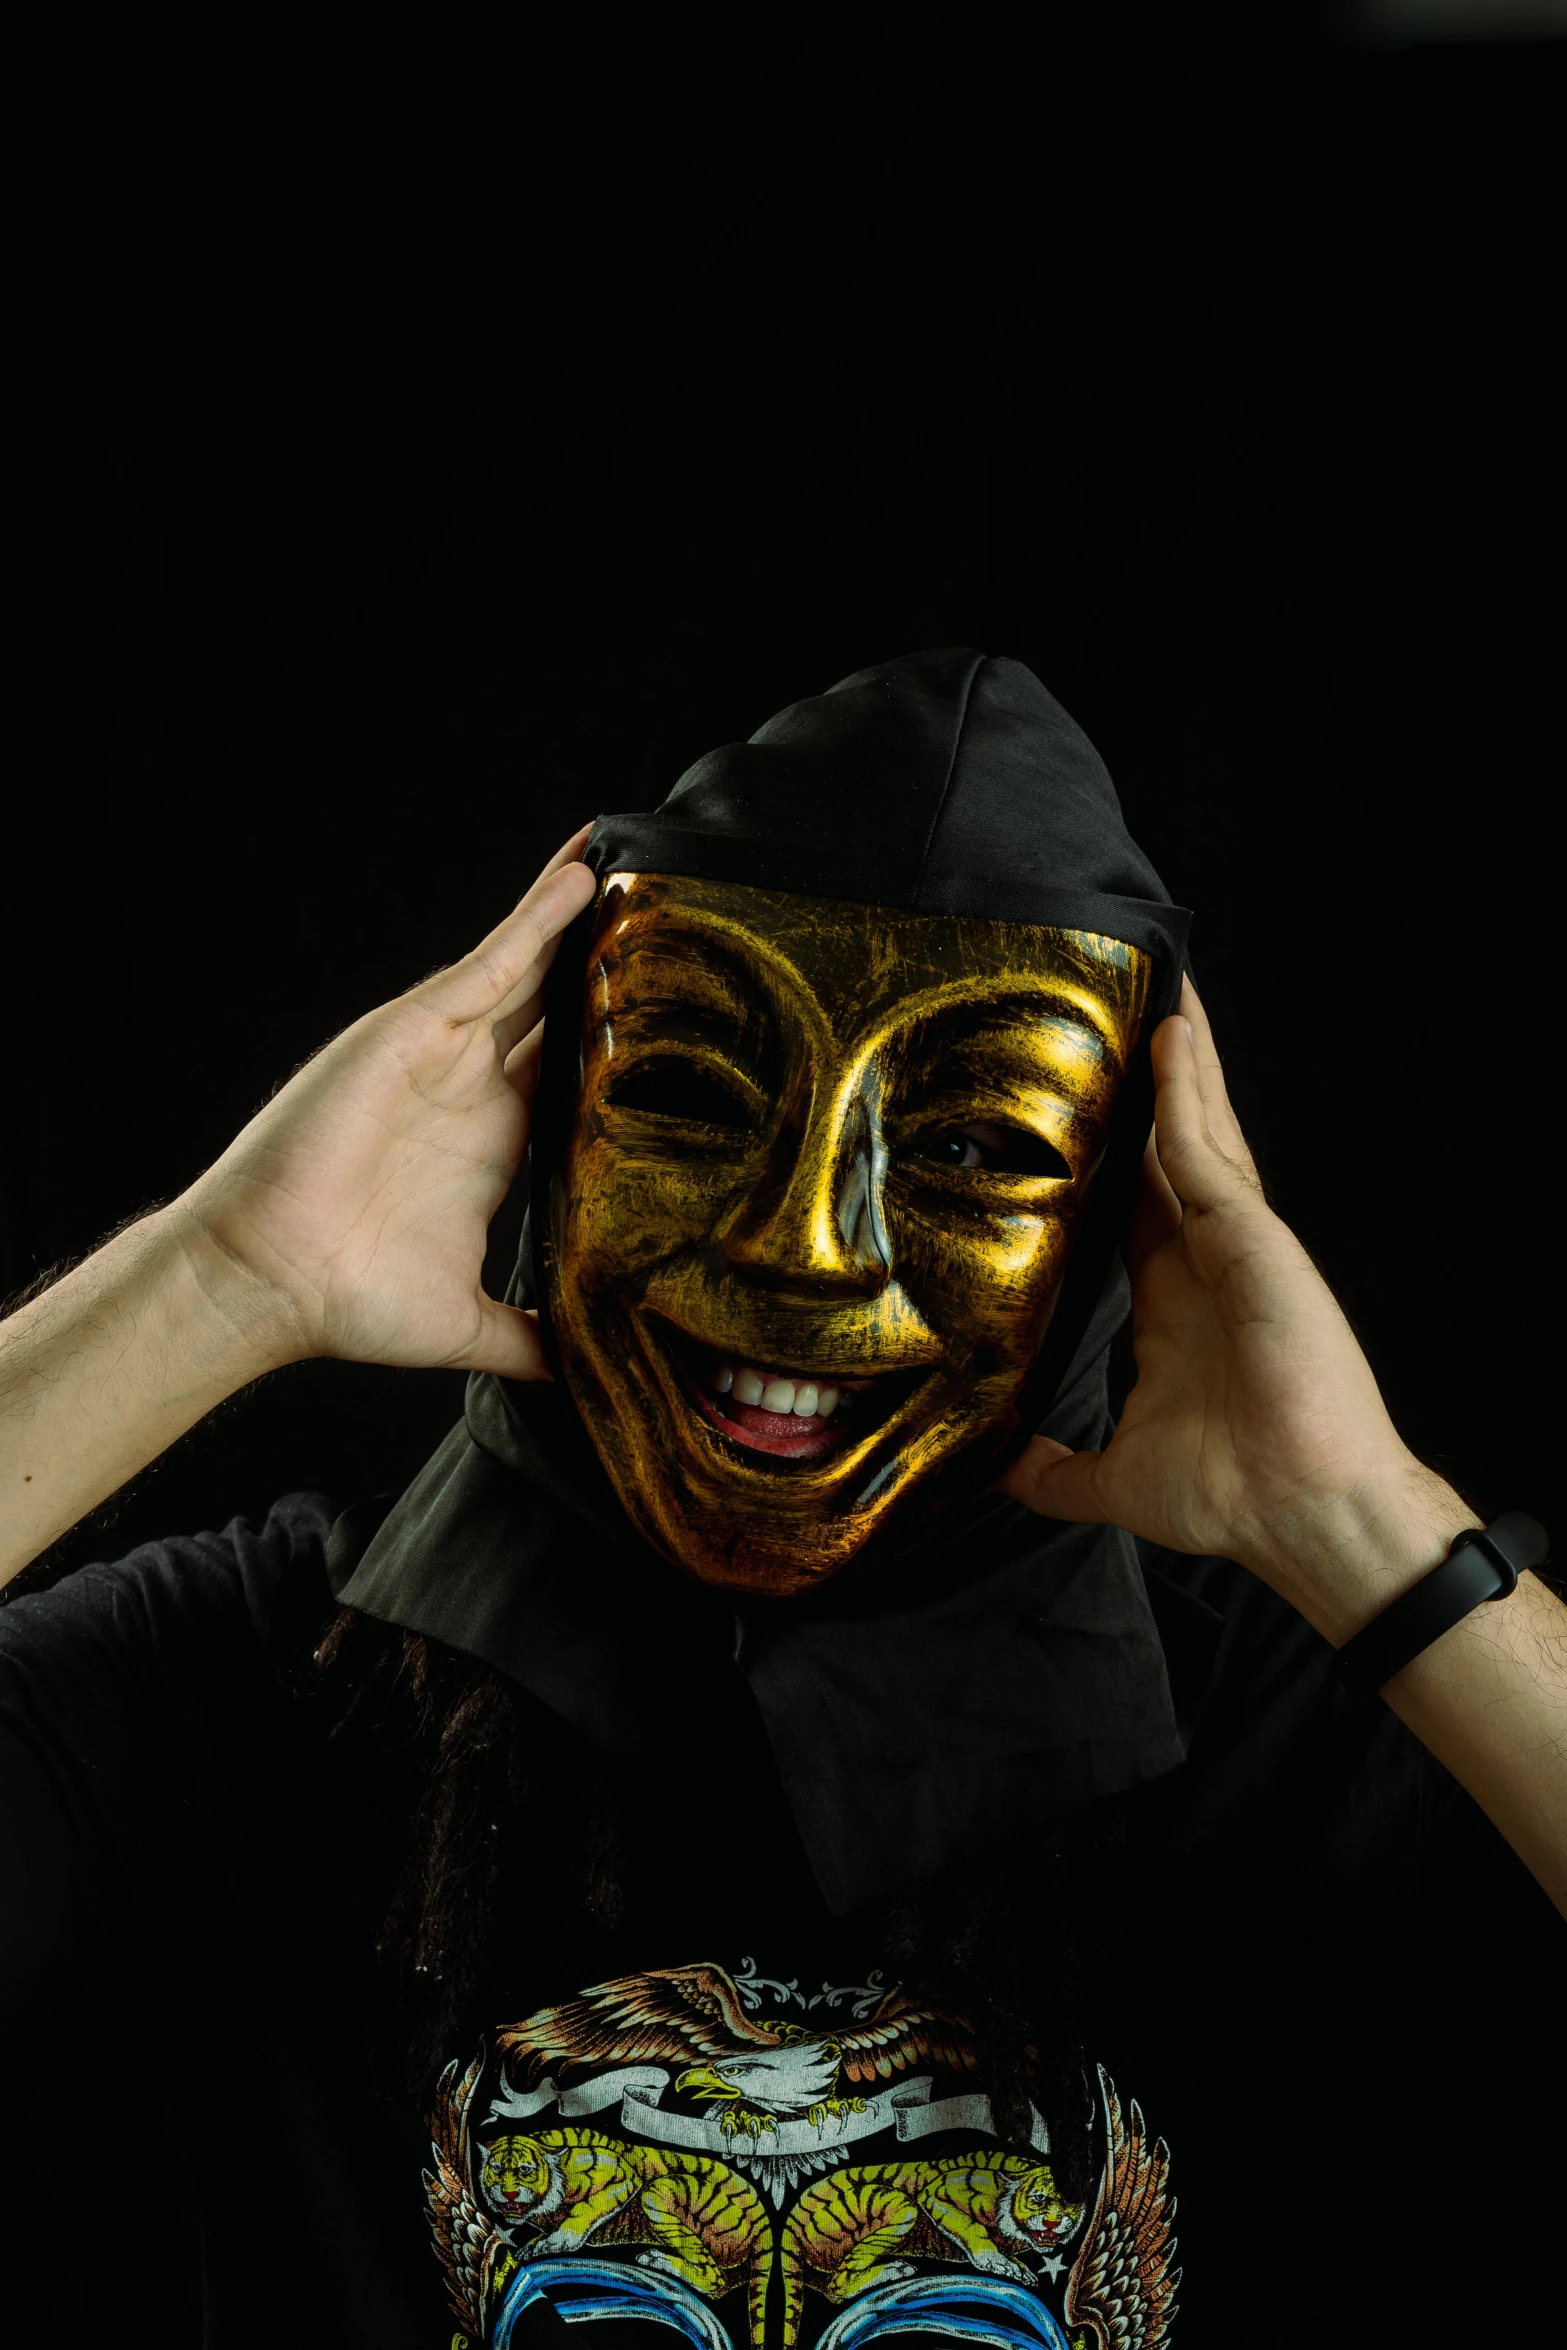 a man wearing a golden mask poses for a po